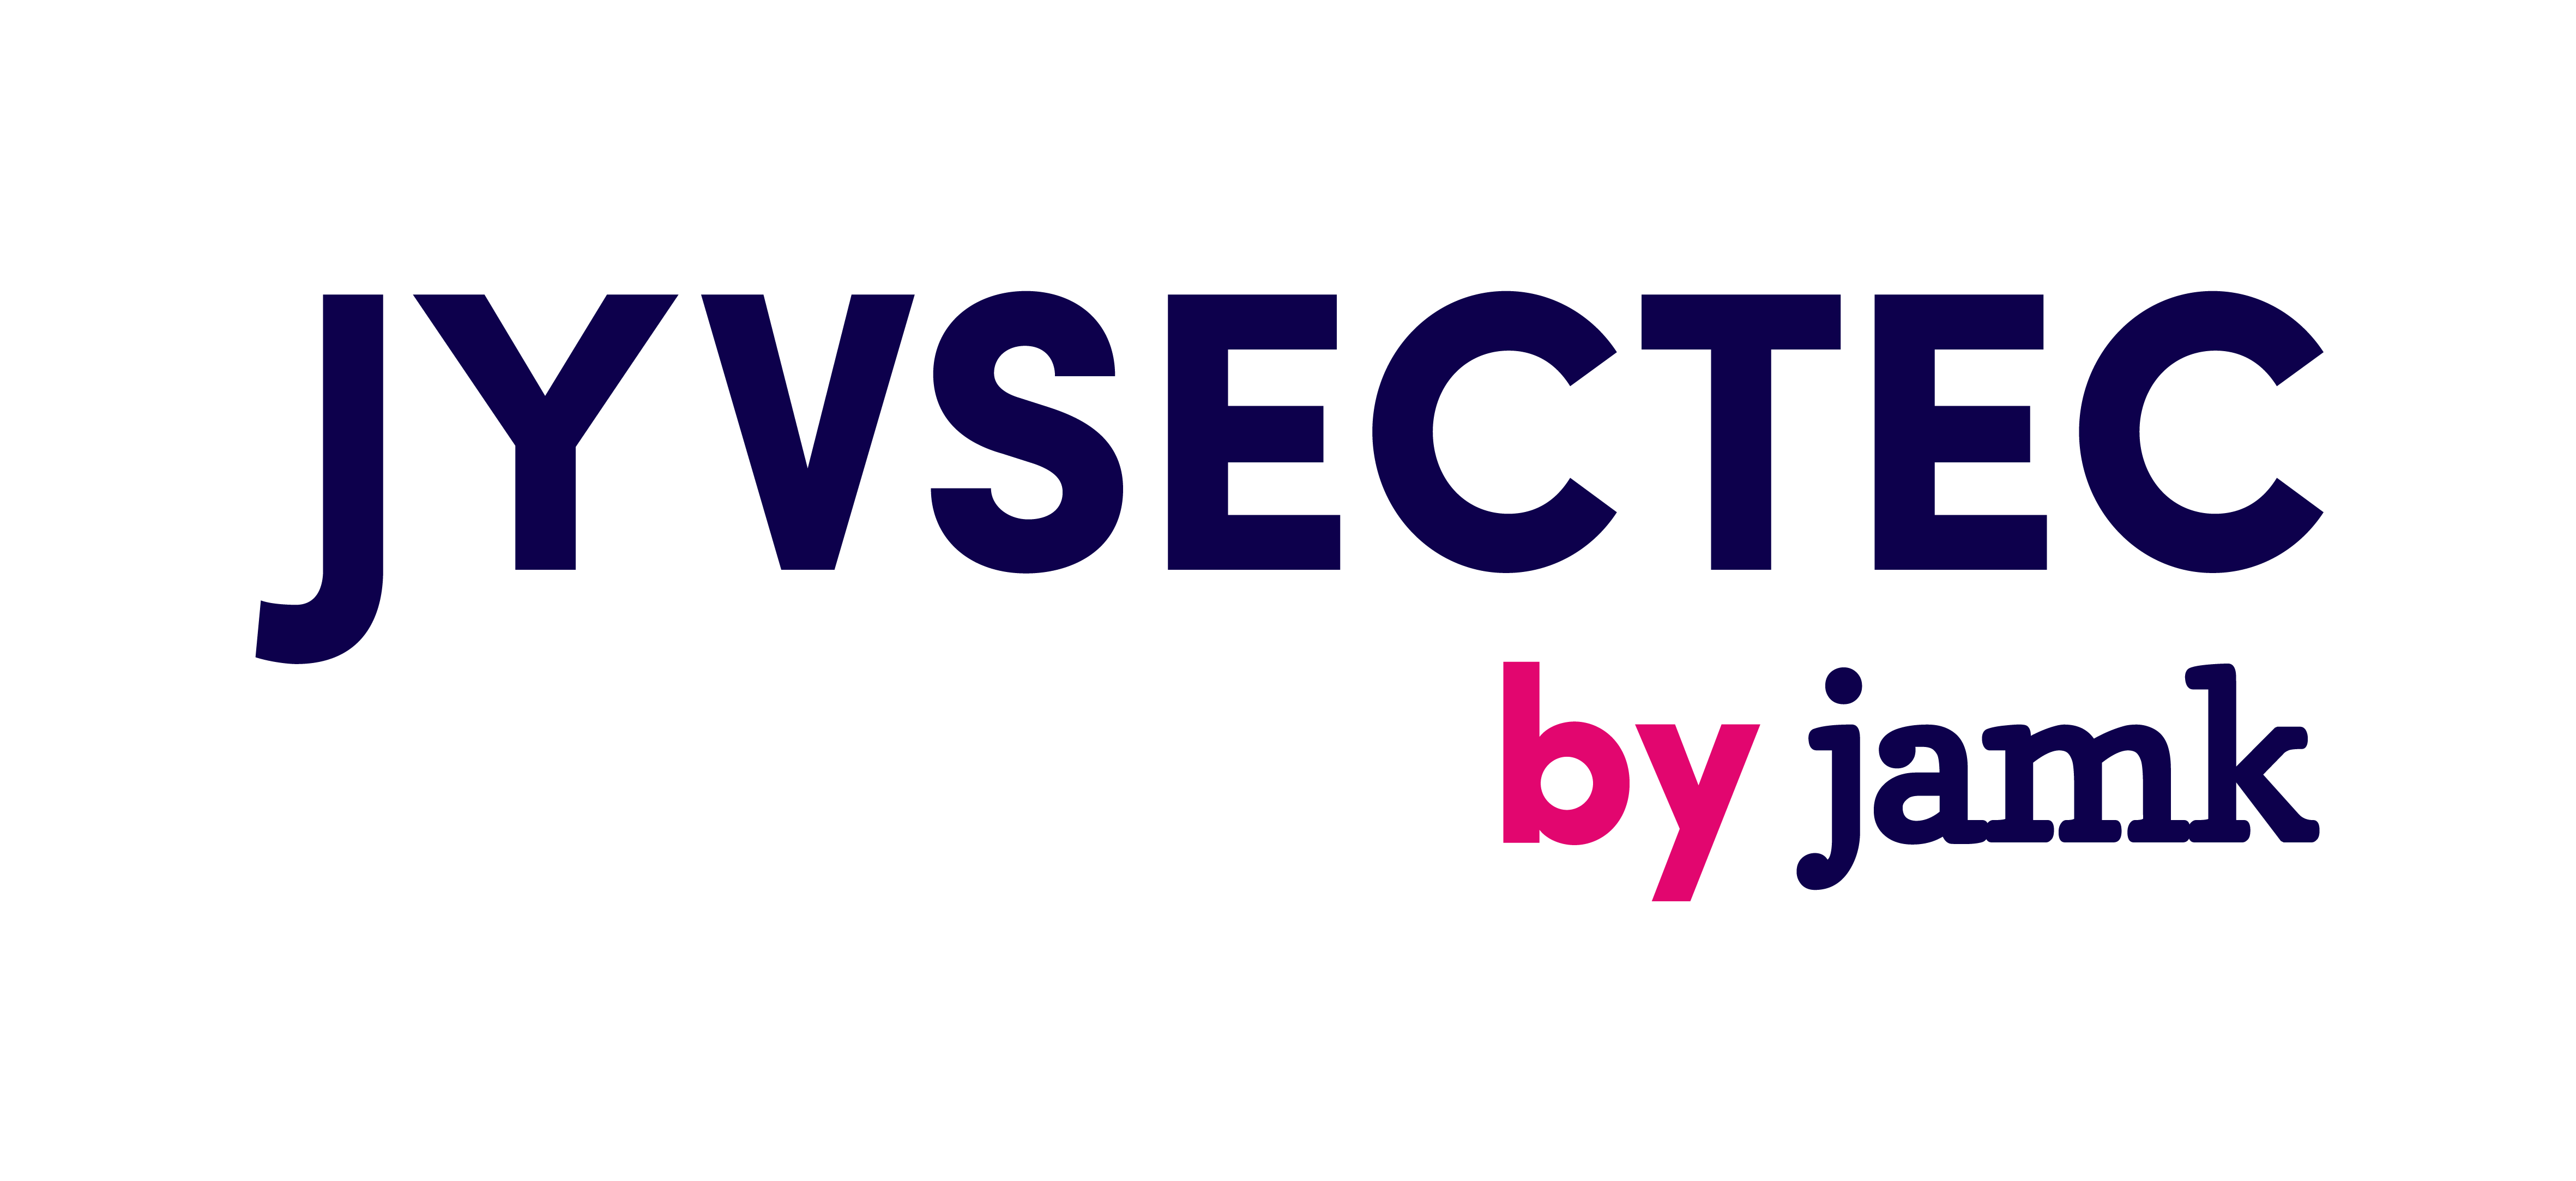 Brand guidelines – JYVSECTEC